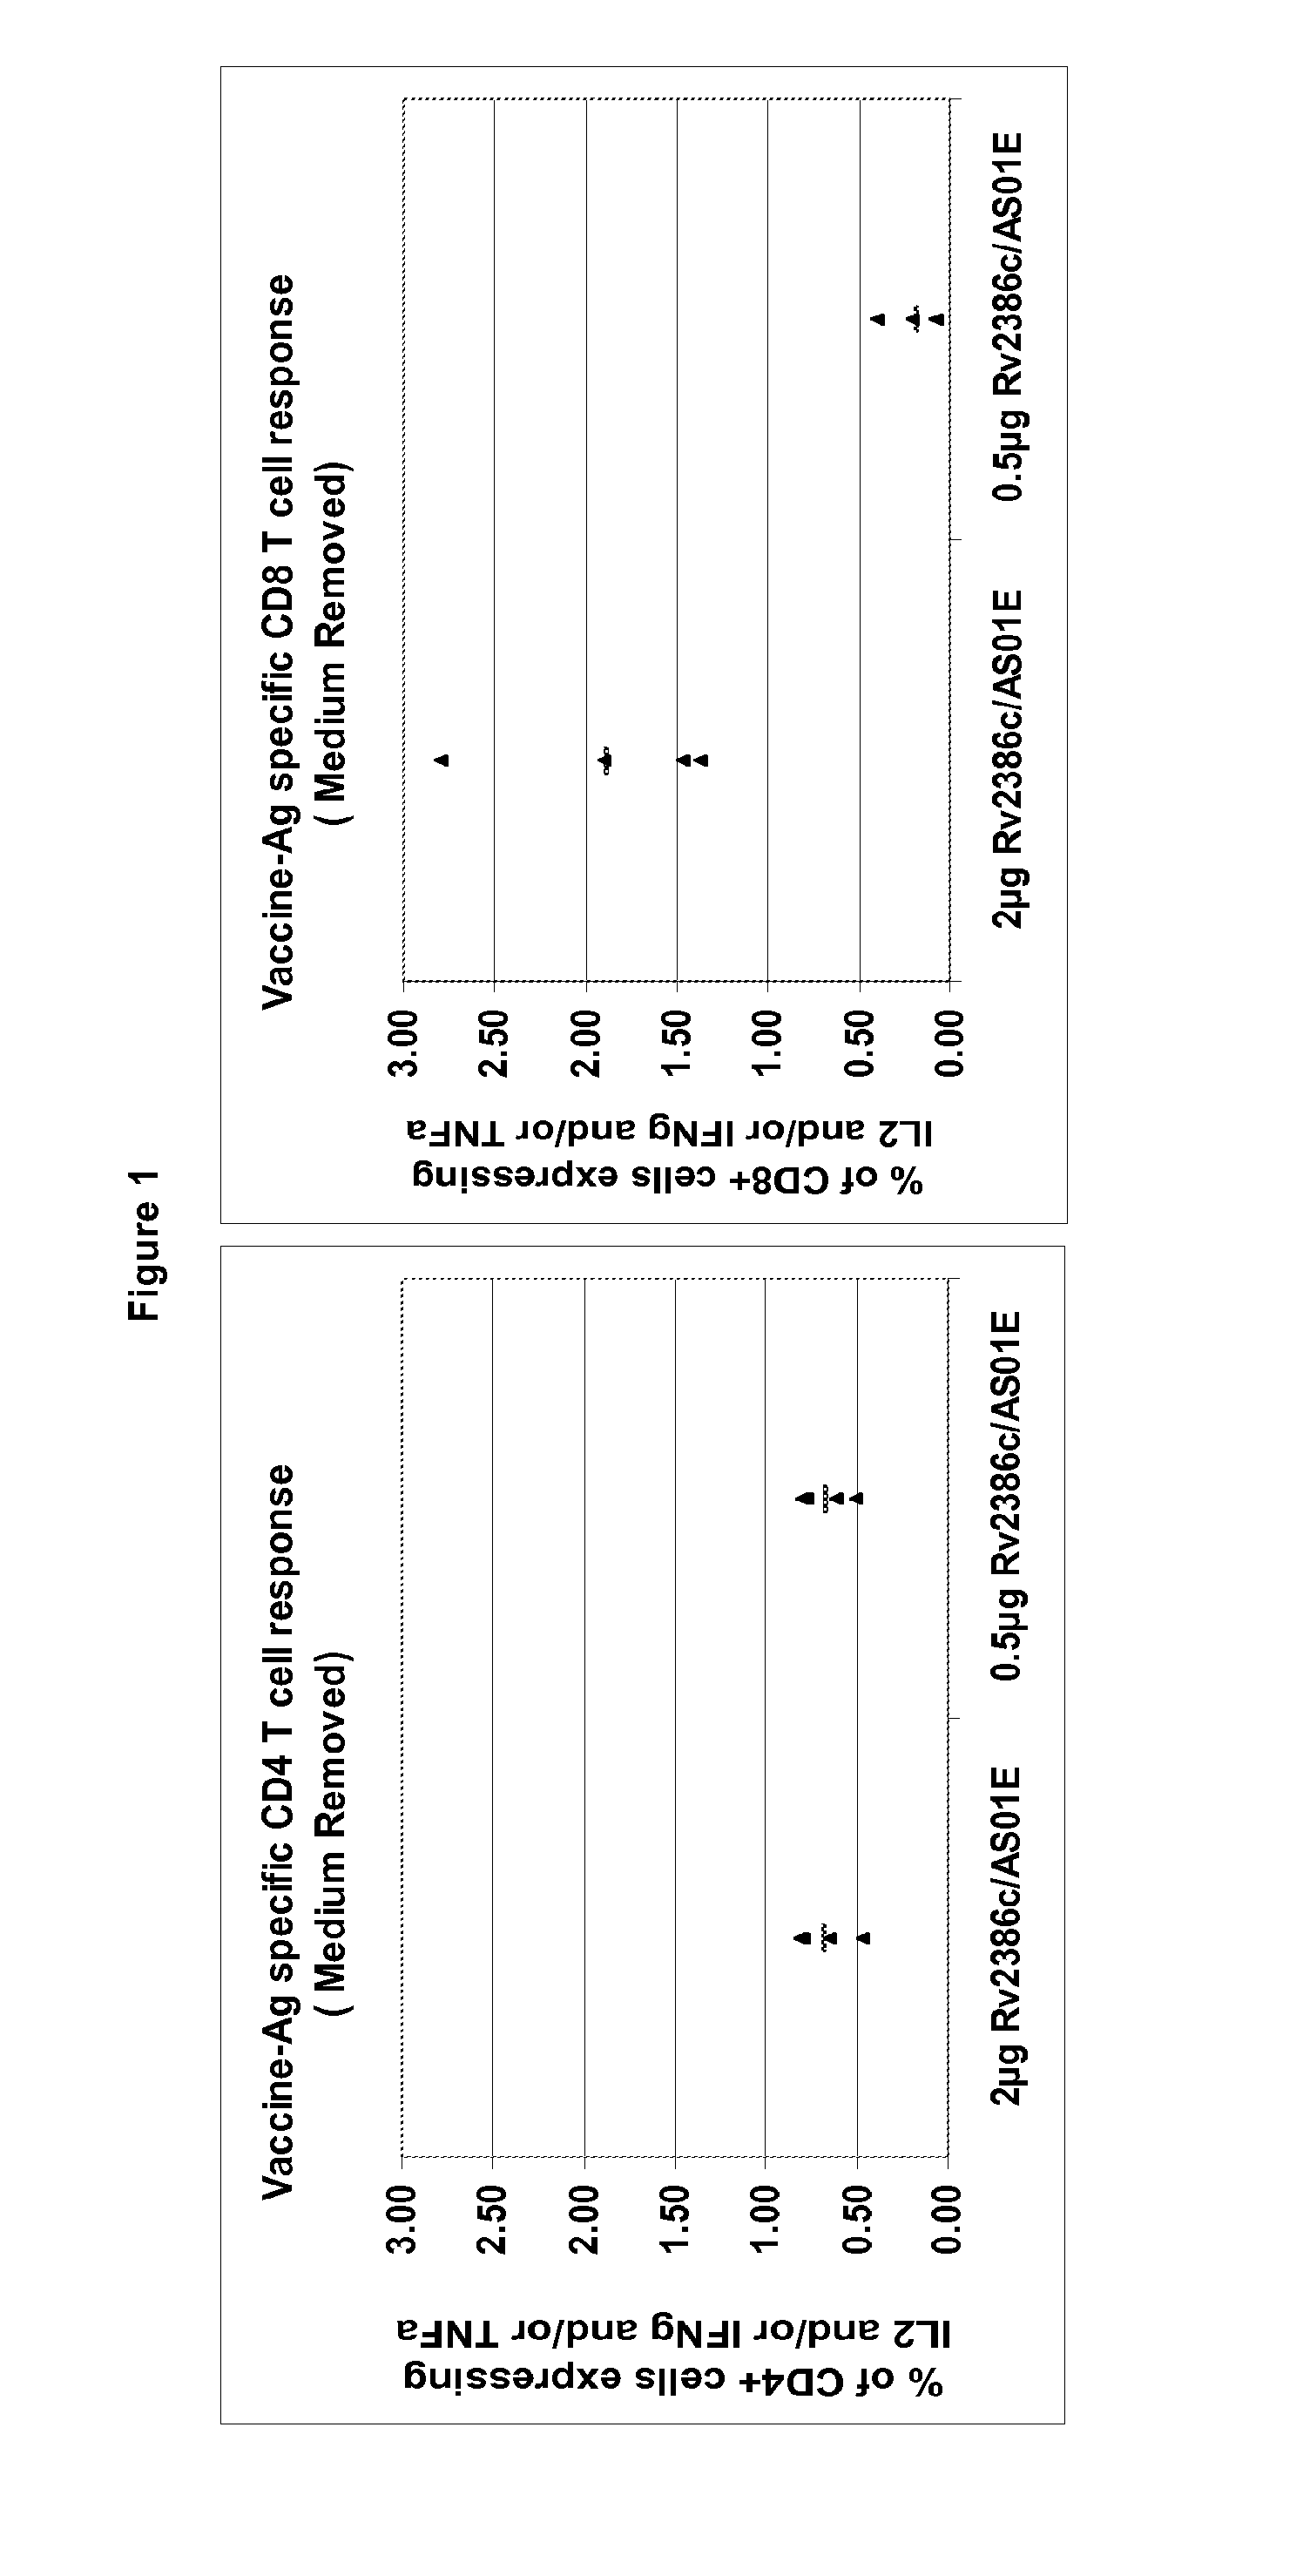 Tuberculosis rv2386c protein, compositions and uses thereof